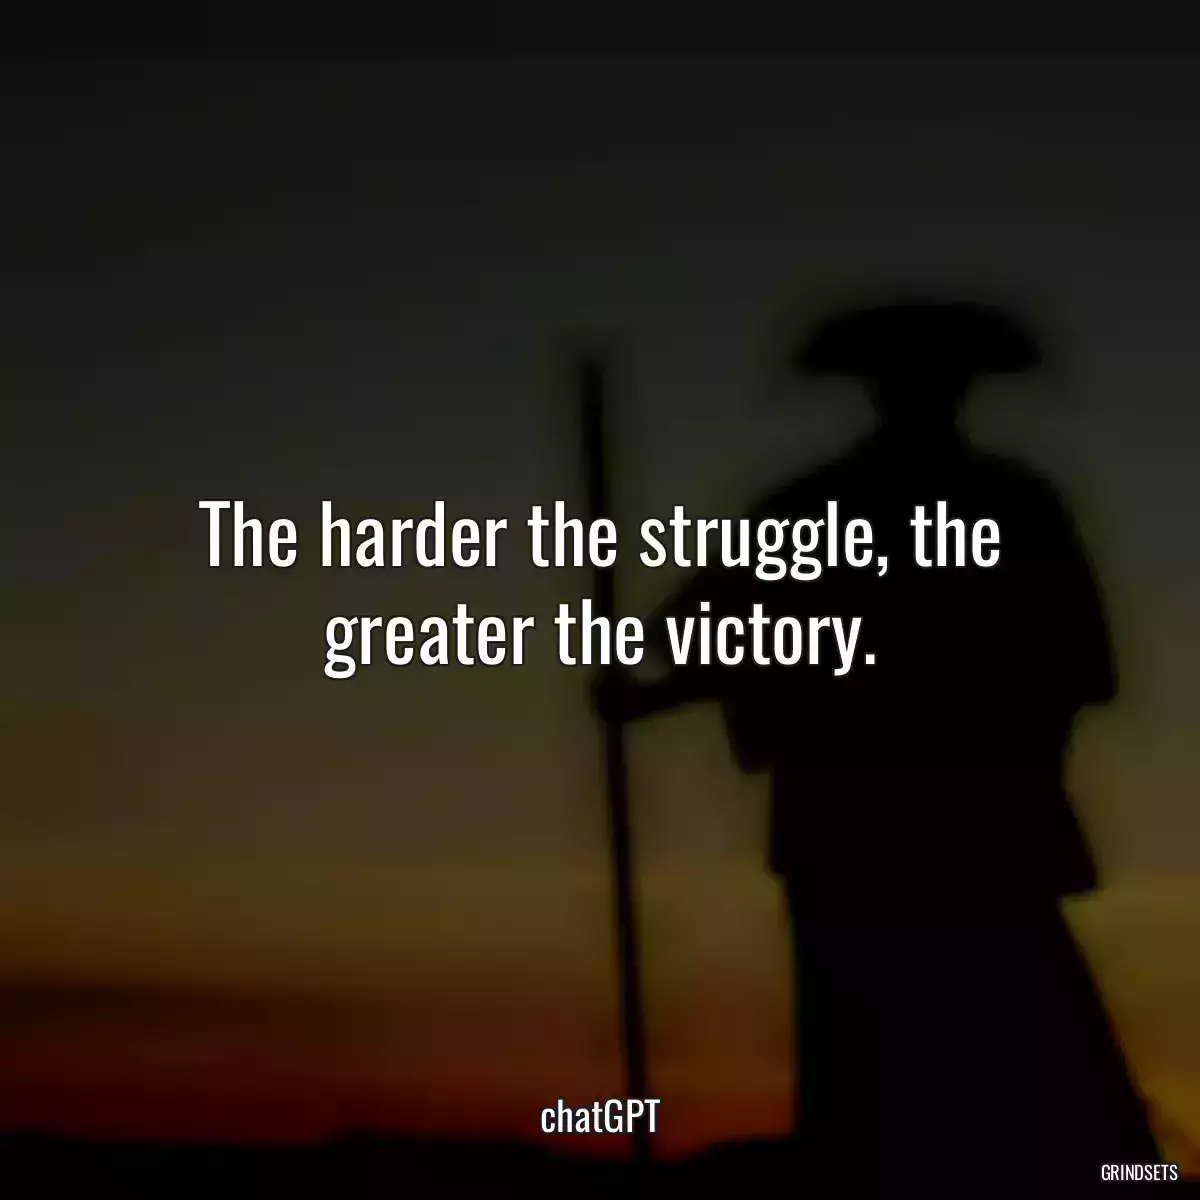 The harder the struggle, the greater the victory.